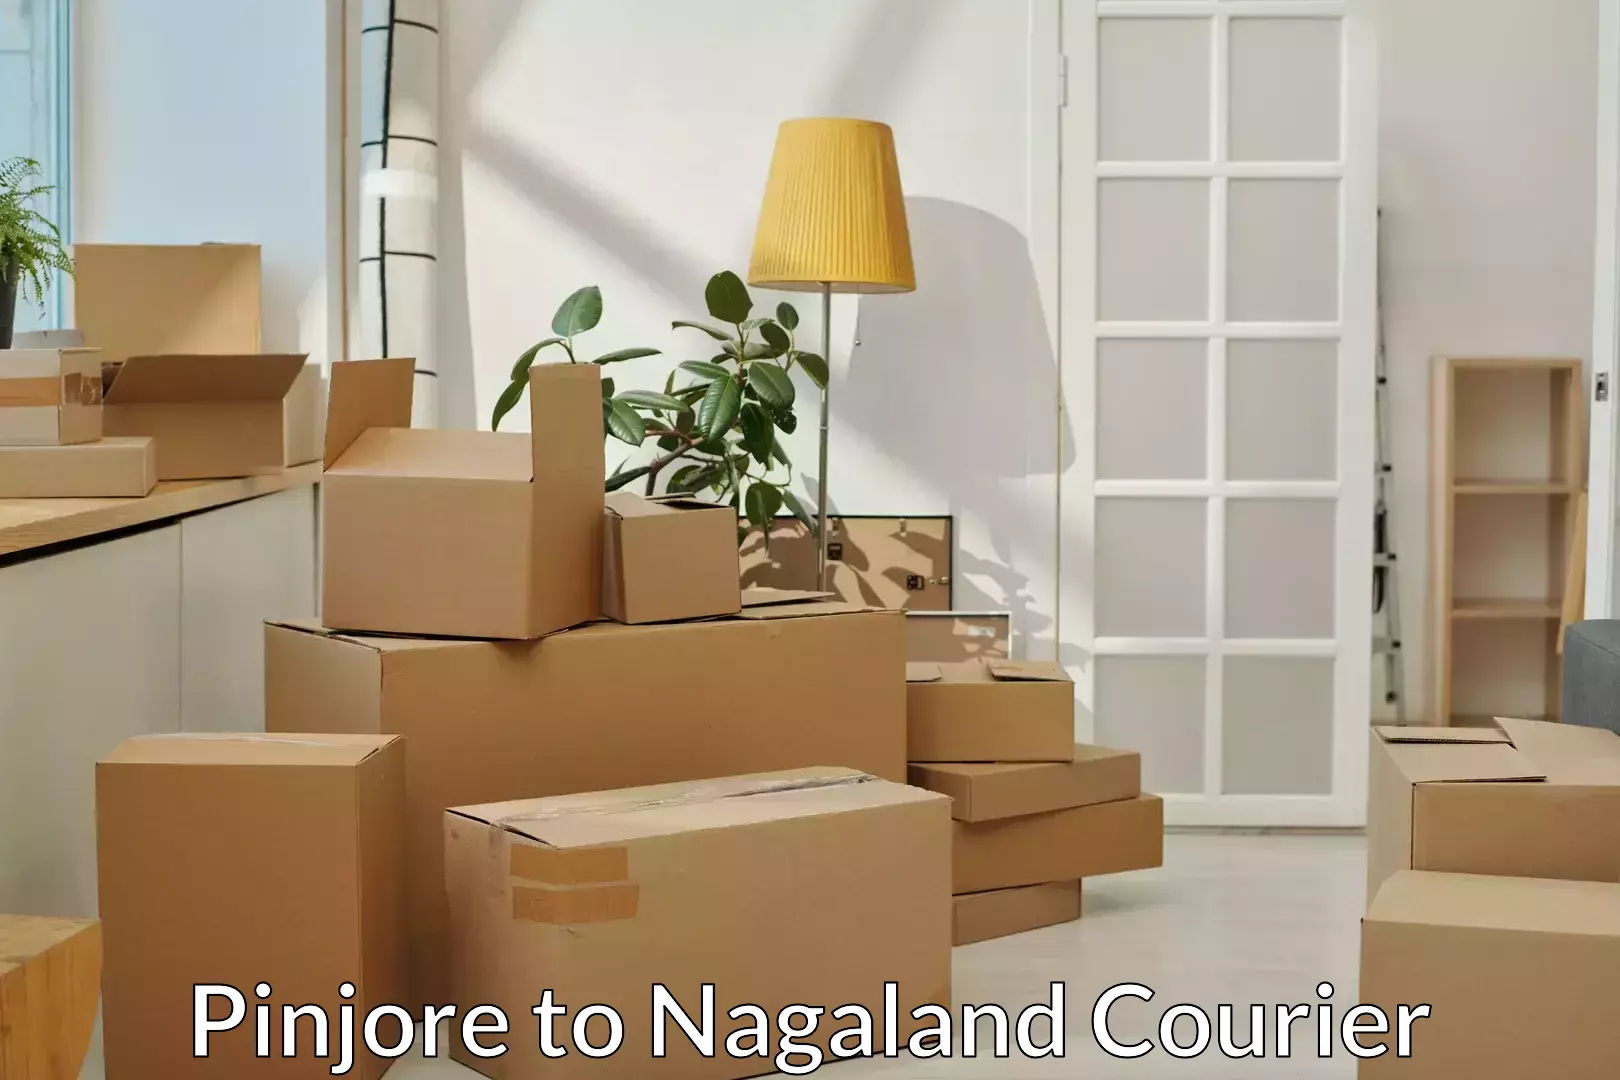 Full-service relocation Pinjore to Nagaland